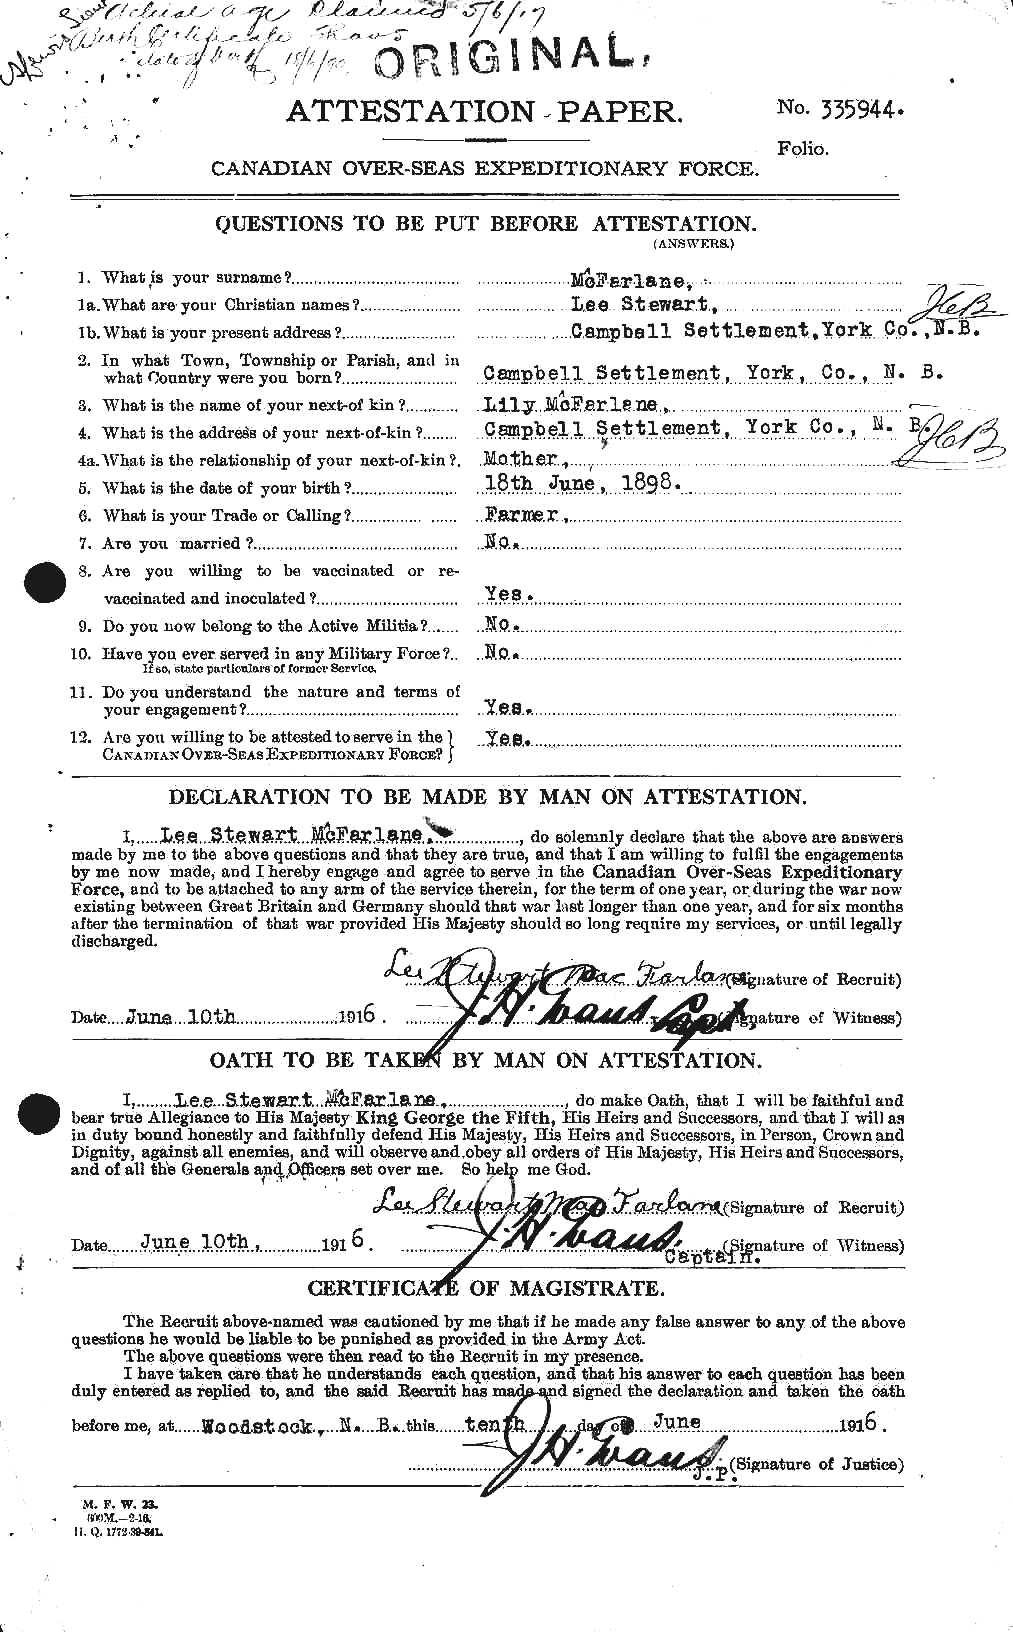 Personnel Records of the First World War - CEF 522715a